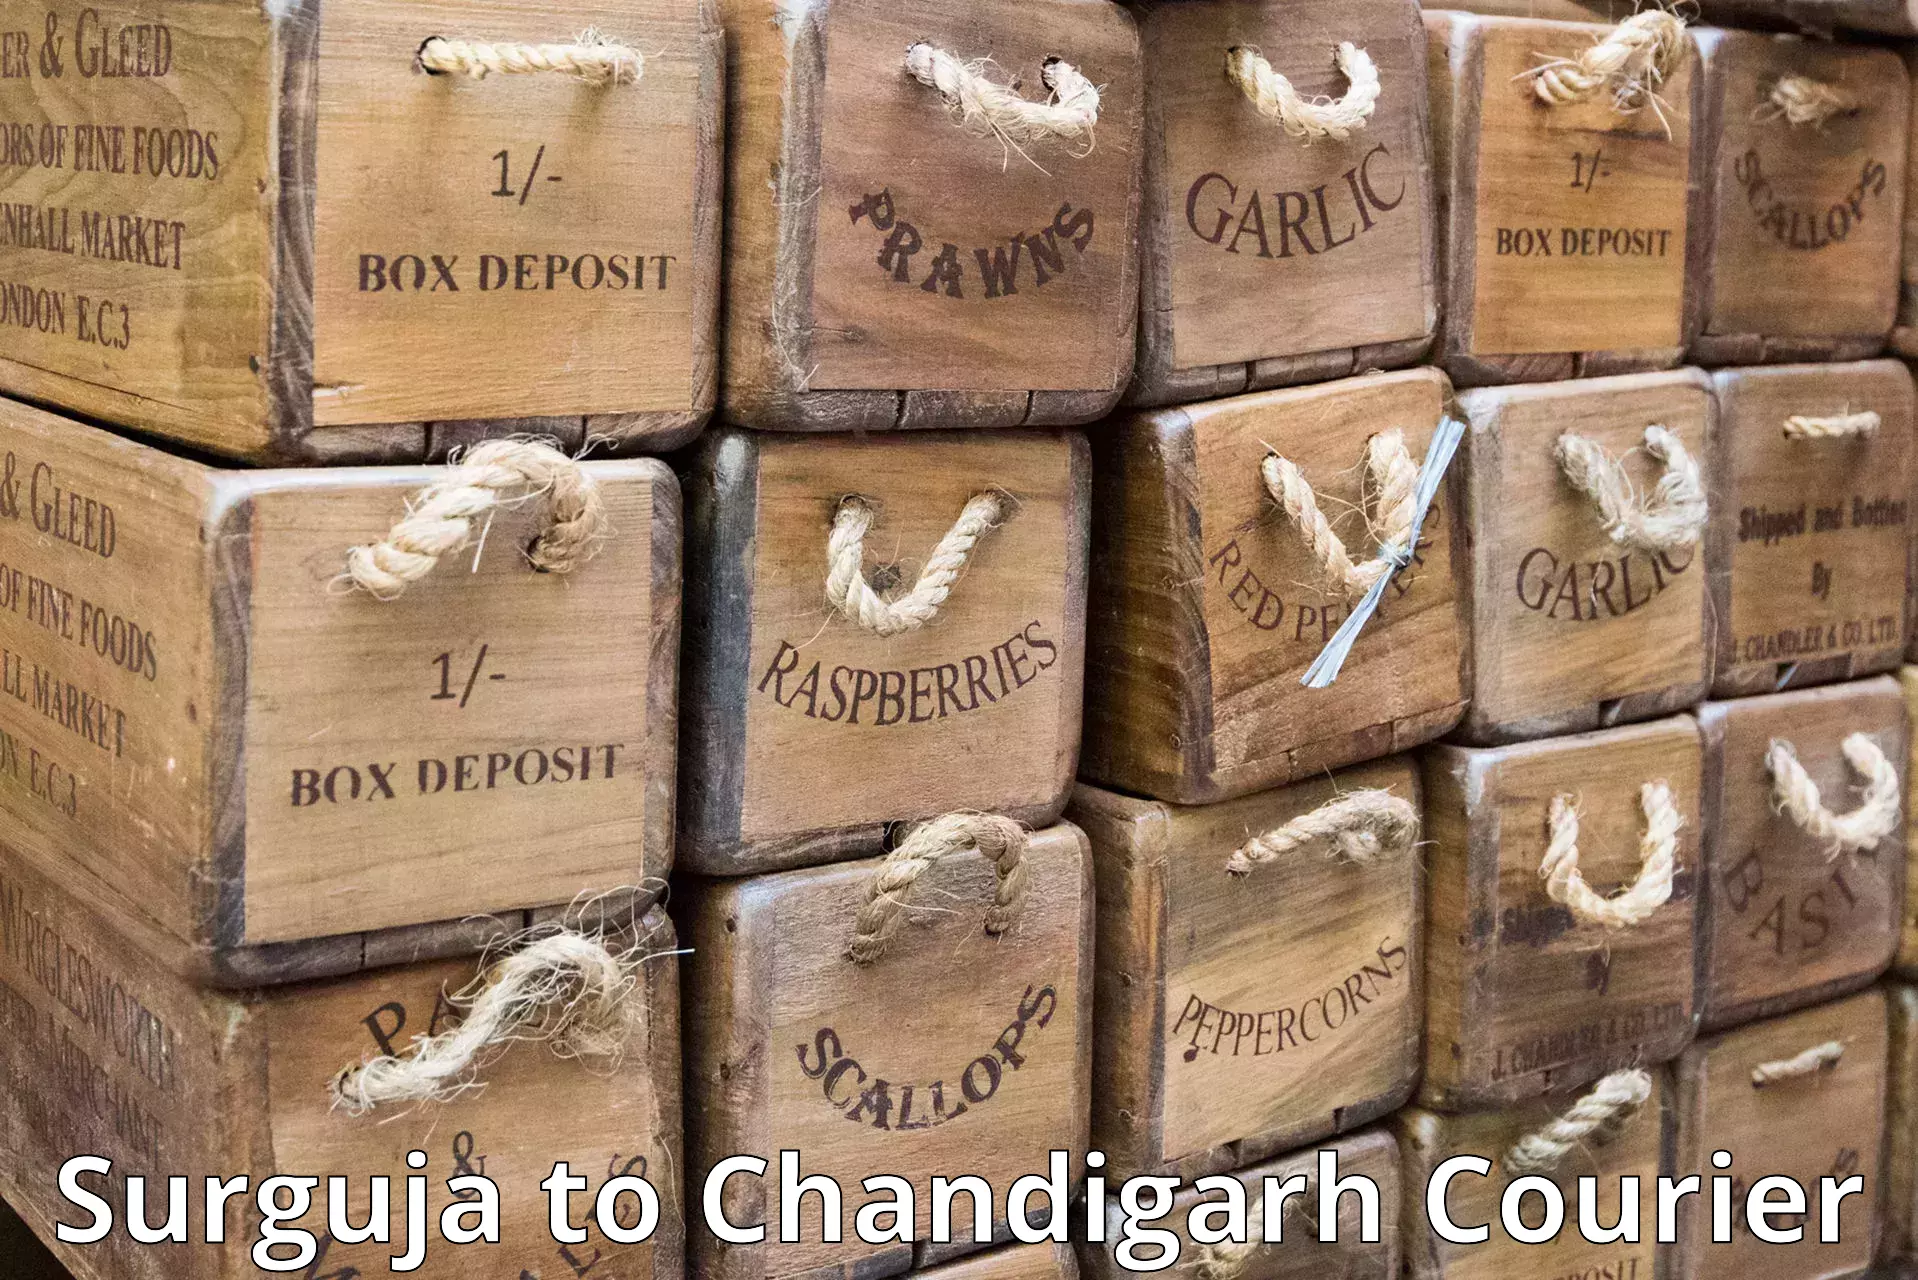 Global shipping solutions in Surguja to Chandigarh